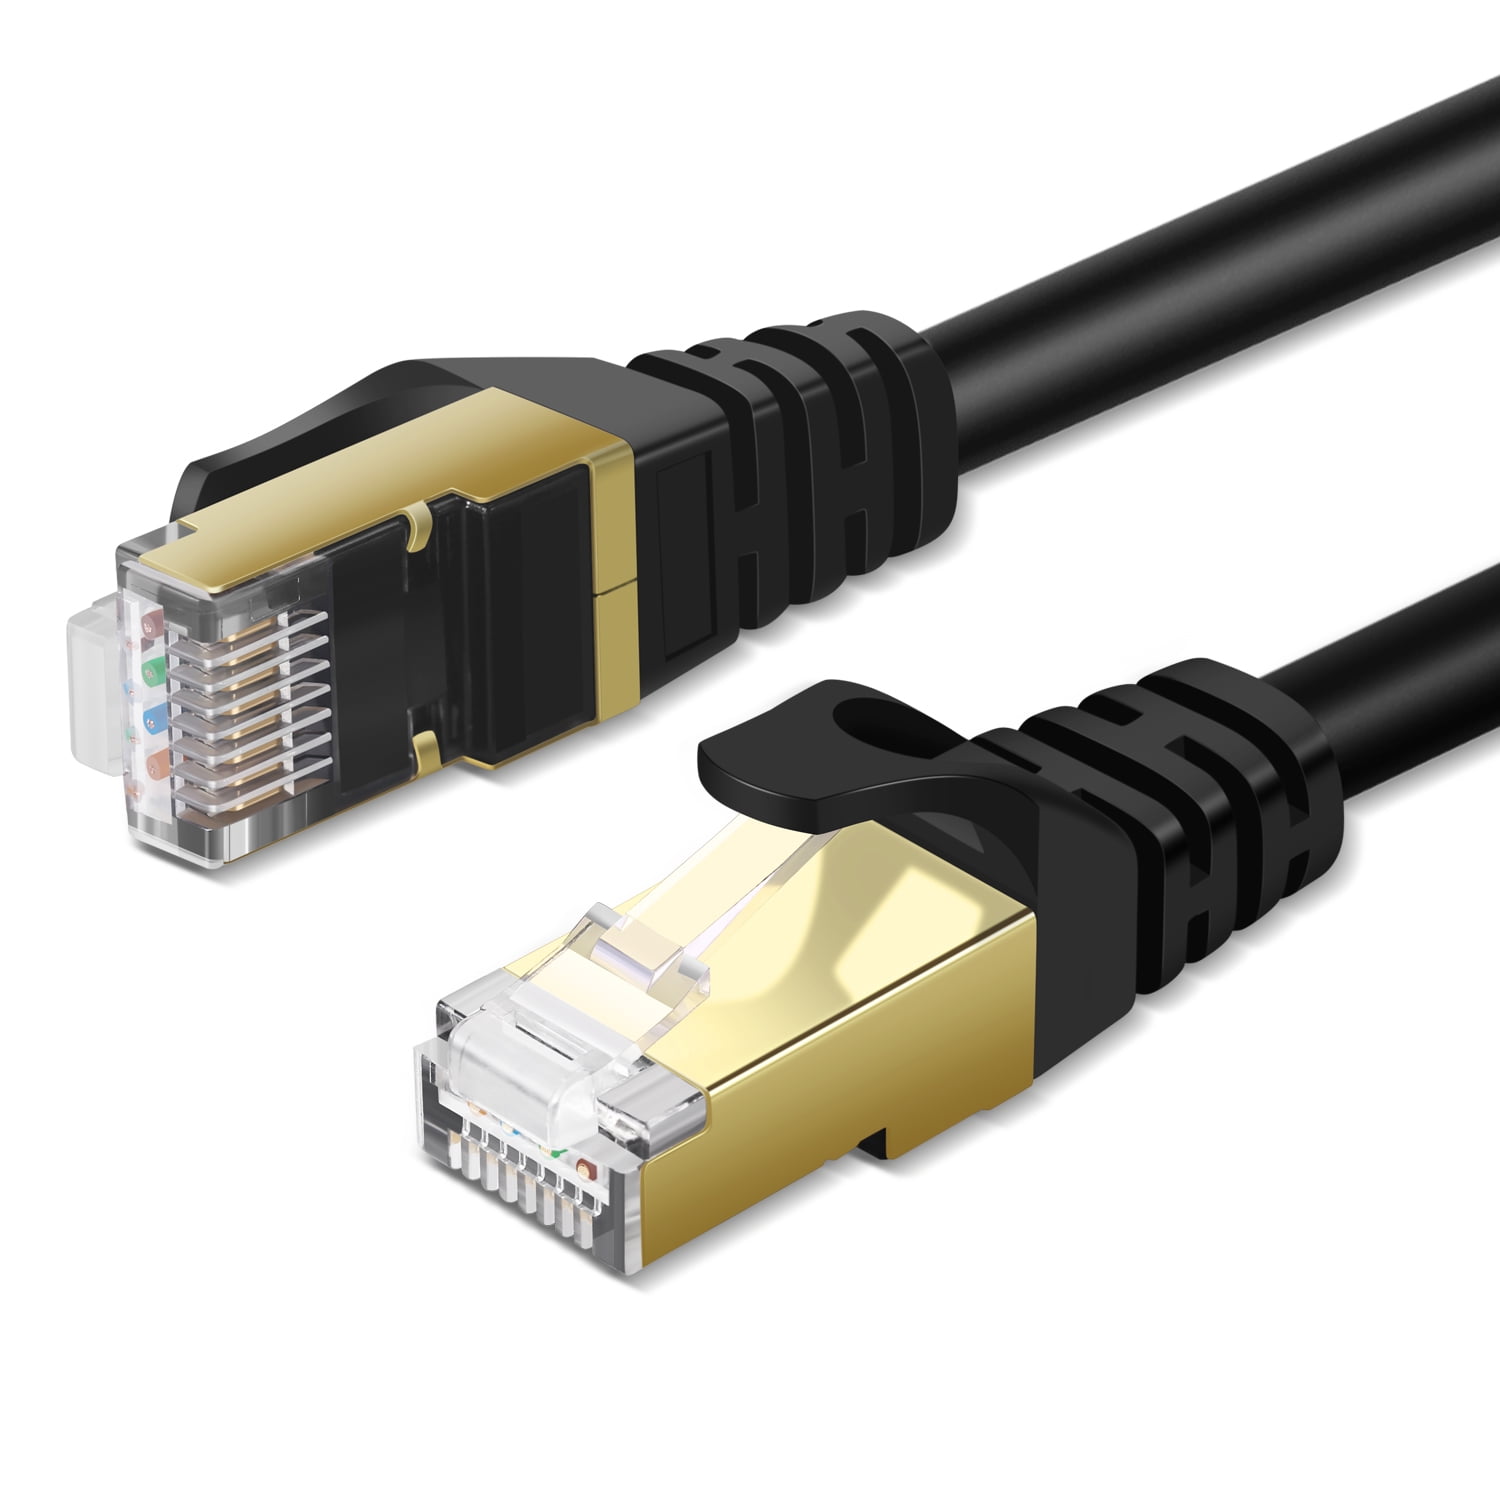 CAT7 100FT Patch Cord Shielded Ethernet Internet Network Lan Cord 10G RJ45 Gold 